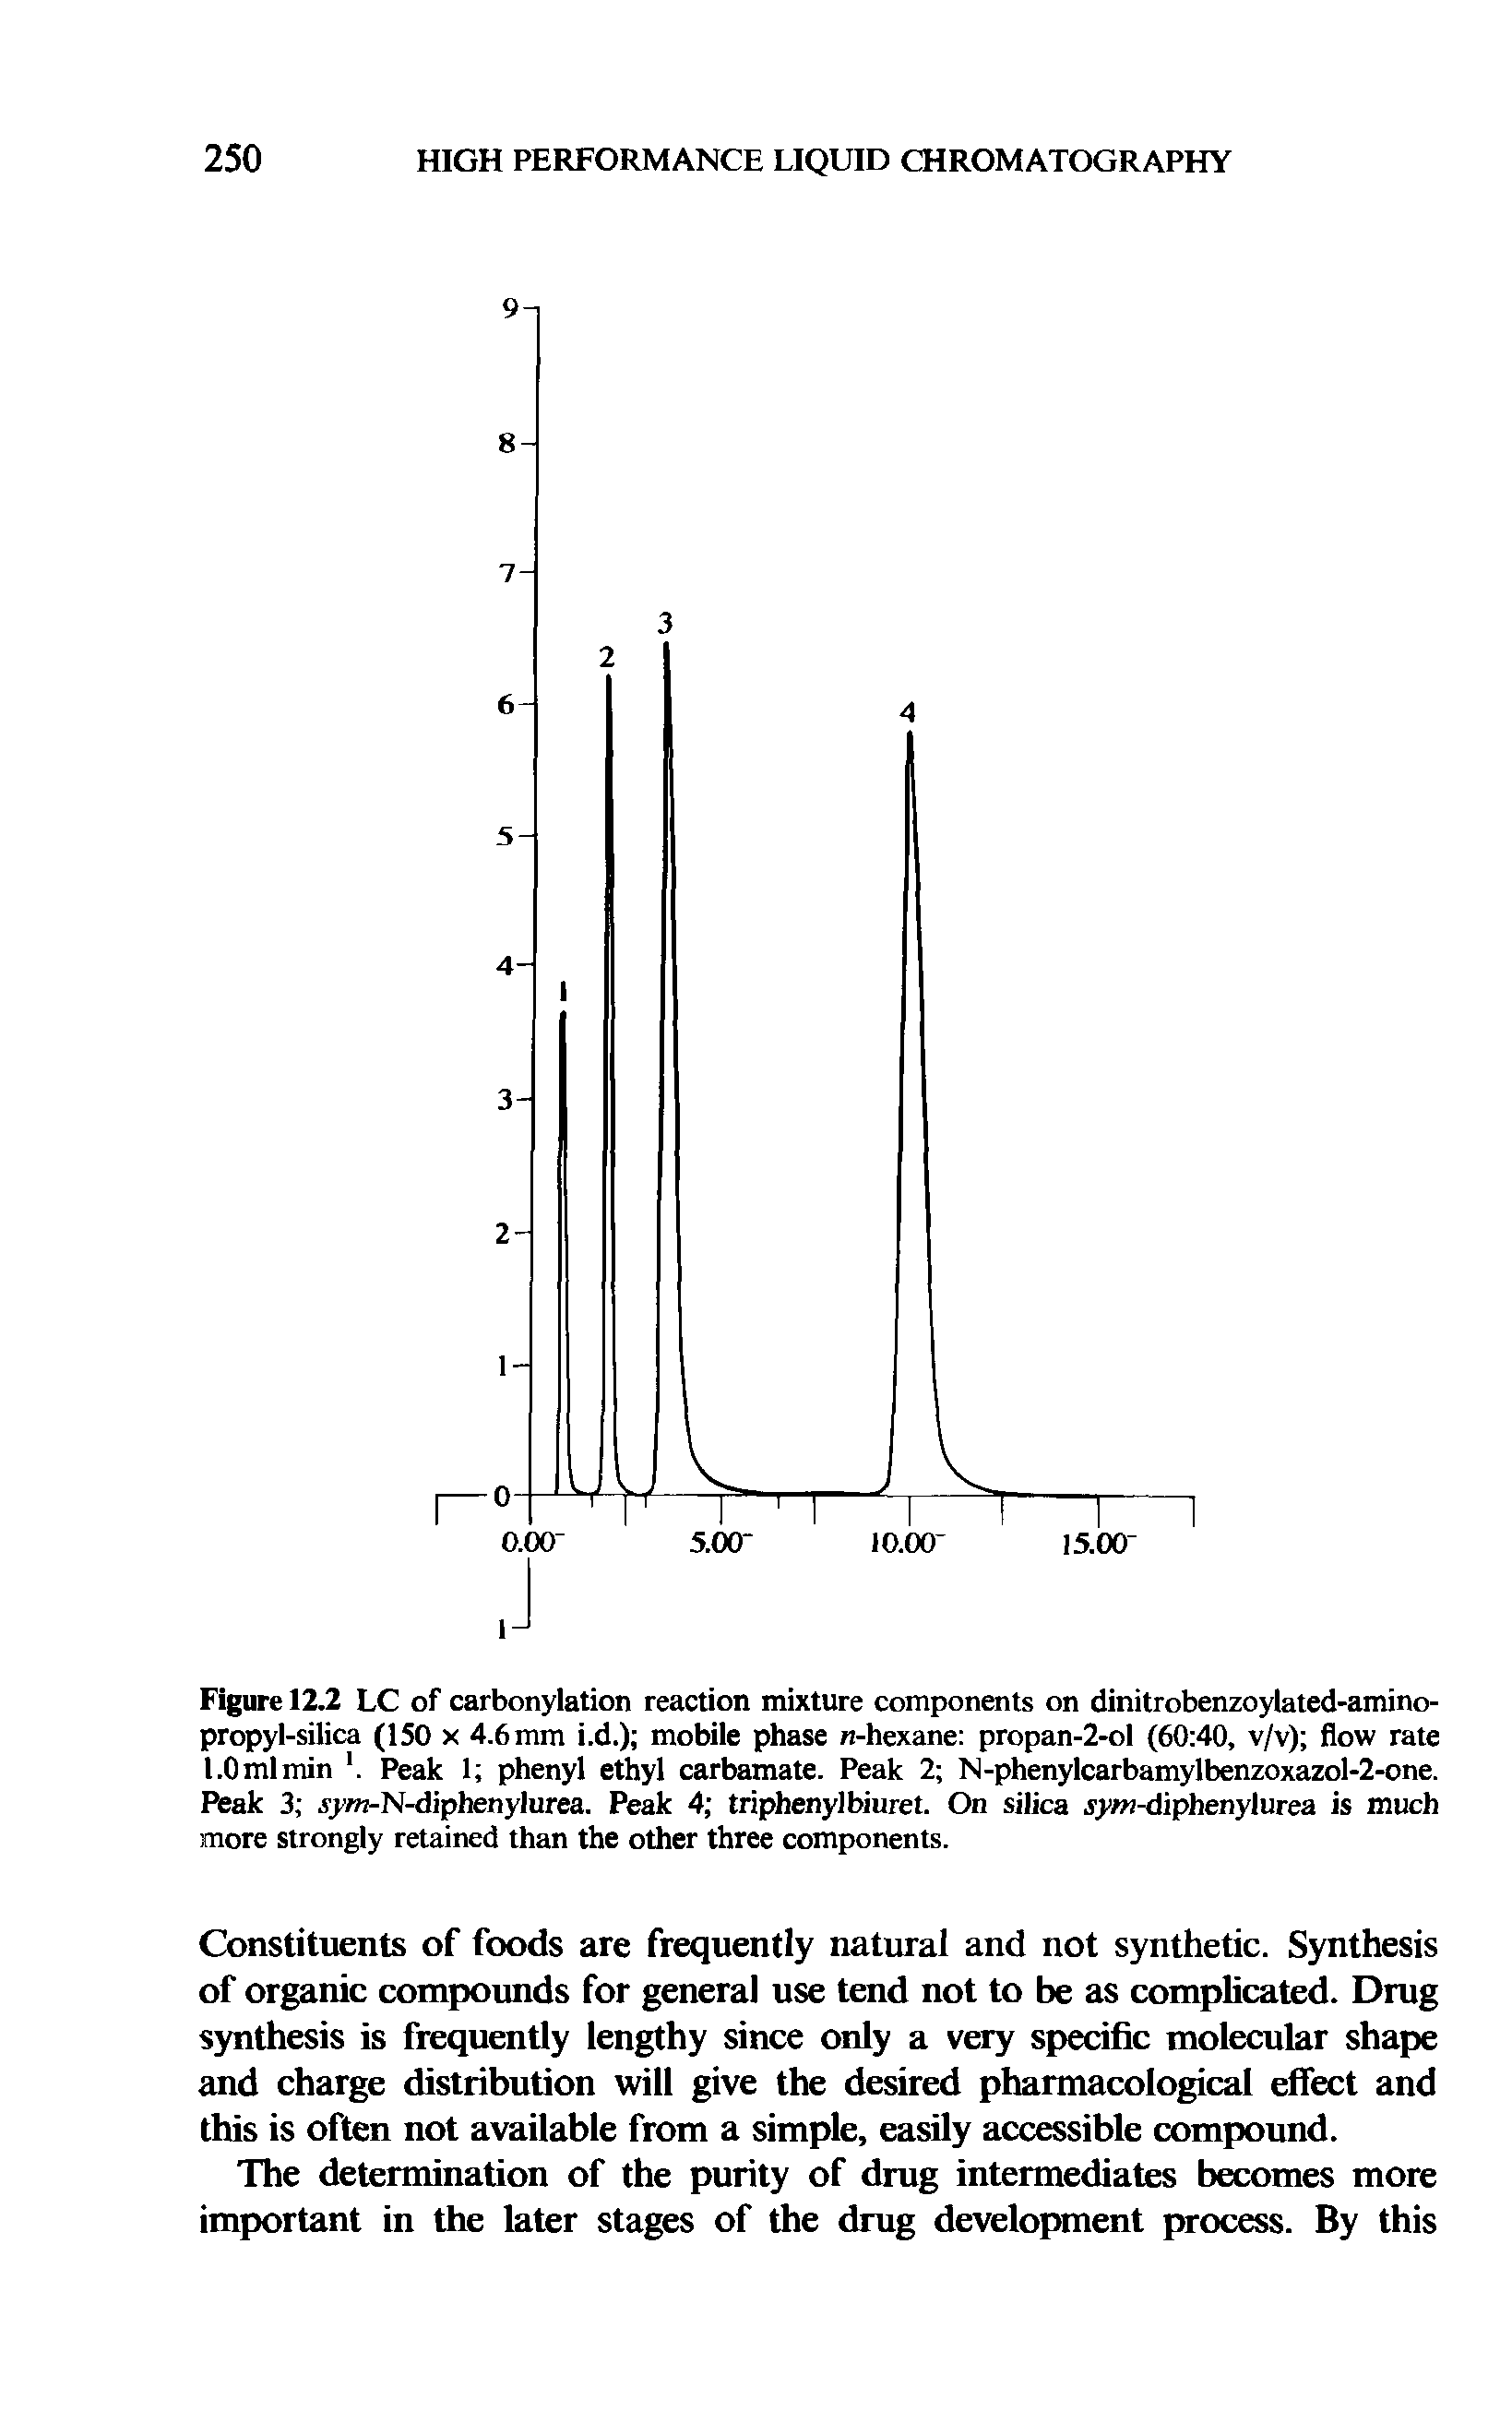 Figure 12.2 LC of carbonylation reaction mixture components on dinitrobenzoylated-amino-propyl-silica (150 x 4.6 mm i.d.) mobile phase n-hexane propan-2-ol (60 40, v/v) flow rate l.Omlmin Peak 1 phenyl ethyl carbamate. Peak 2 N-phenylcarbamylbenzoxazol-2-one. Peak 3 ynj-N-diphenylurea. Peak 4 triphenyl biuret. On silica jy/w-diphenylurea is much more strongly retained than the other three components.